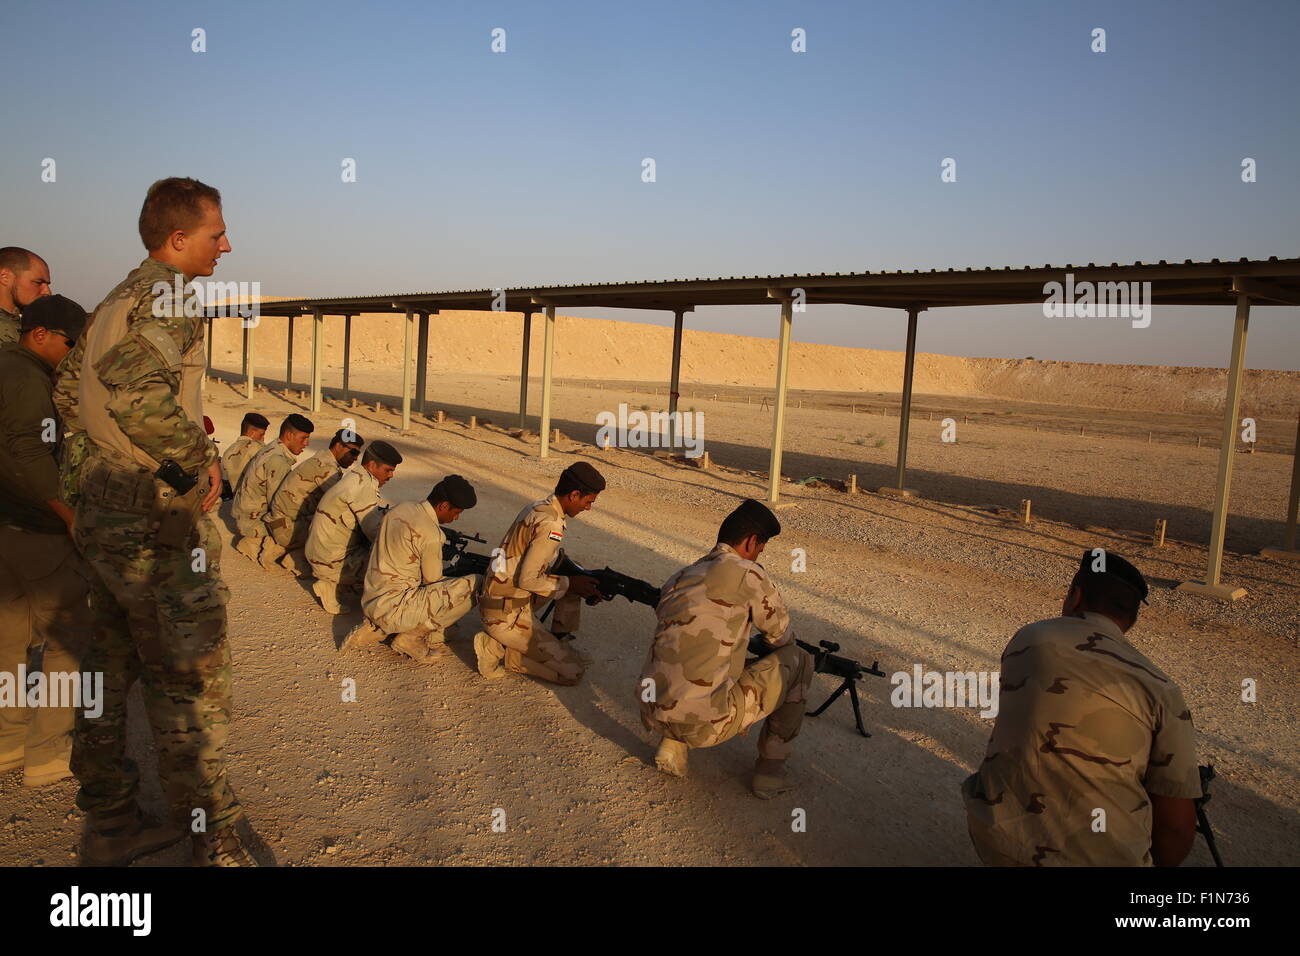 Iraqi army soldiers from the 75th Brigade learn how to use their new M240B machine guns during training September 4, 2015 at Al Asad Air Base, Iraq. Stock Photo